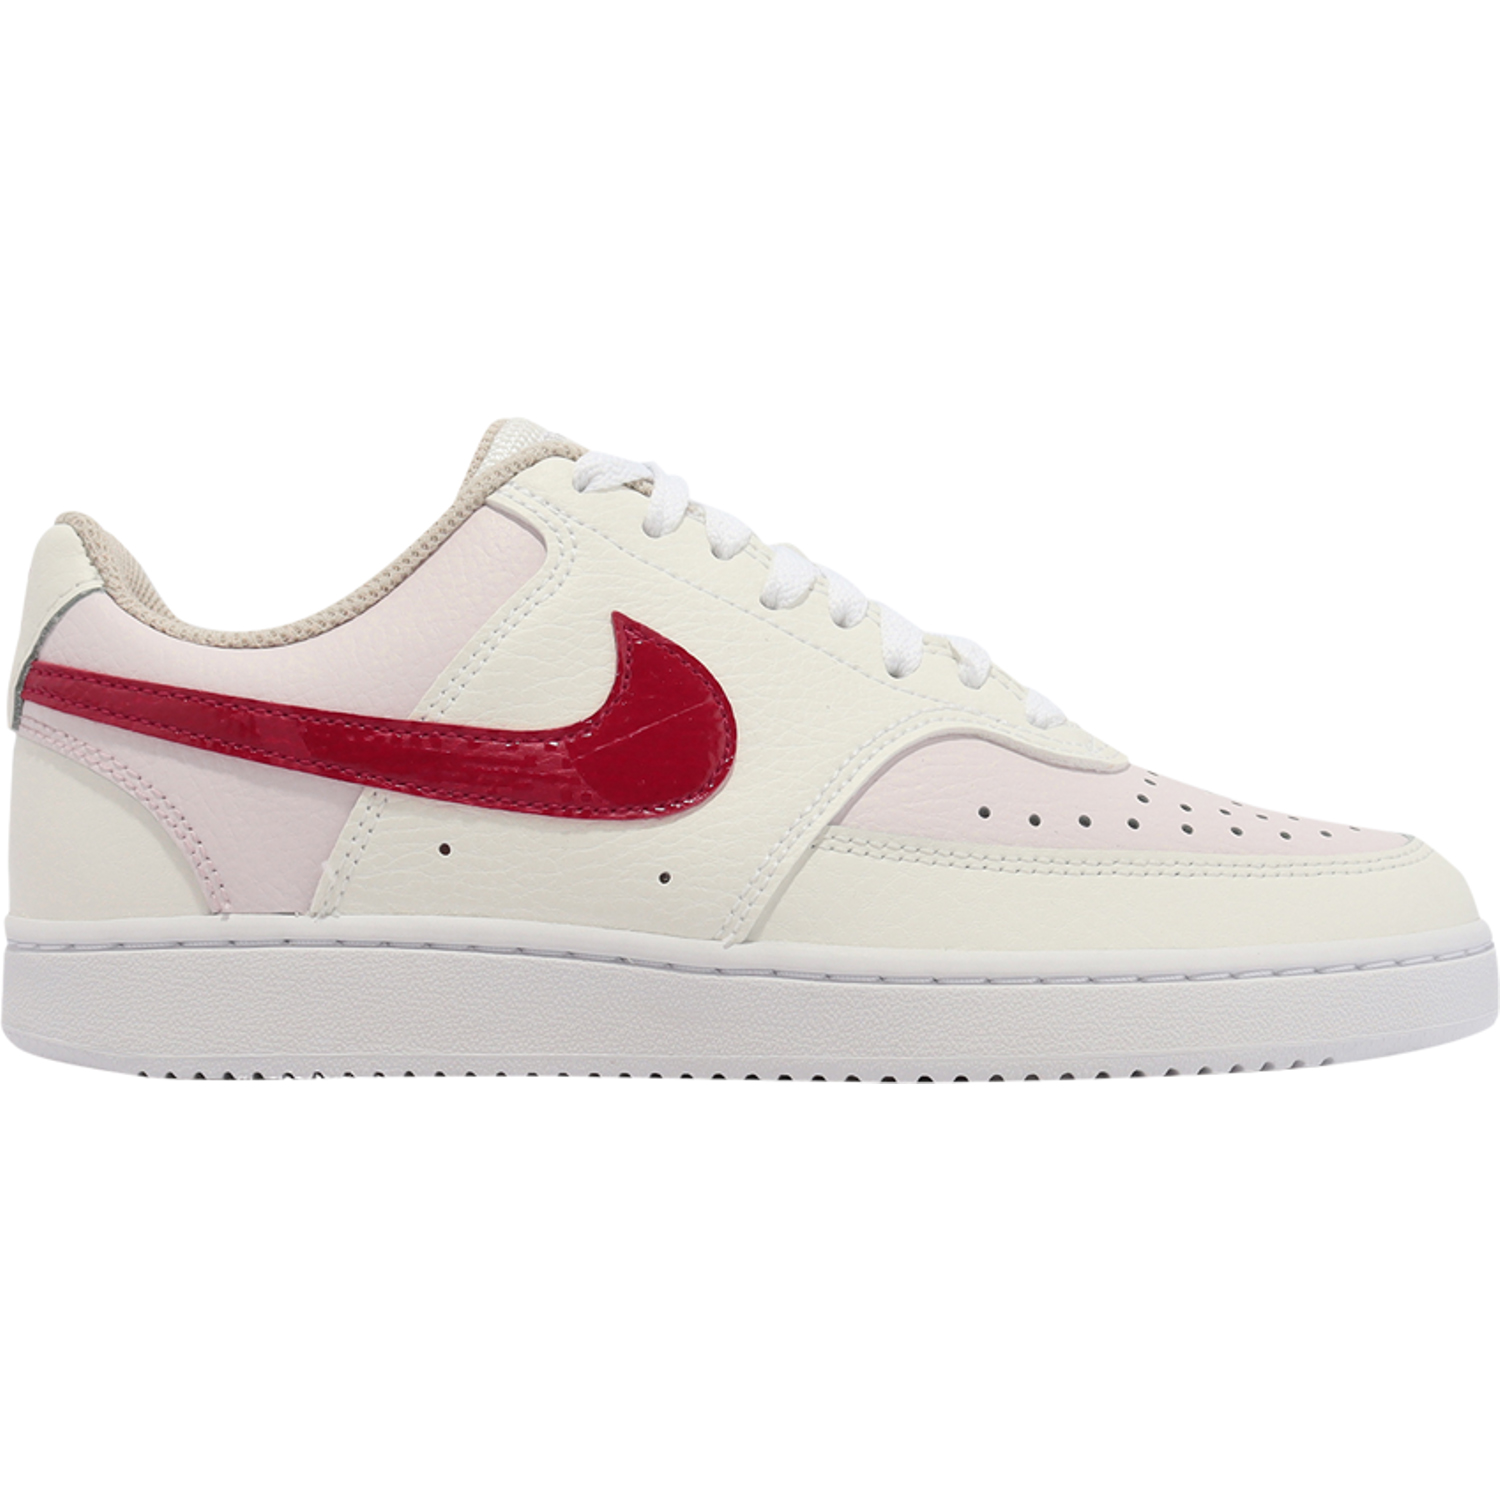 Кроссовки Nike Wmns Court Vision Low, розовый кроссовки nike wmns court vision low white university red белый